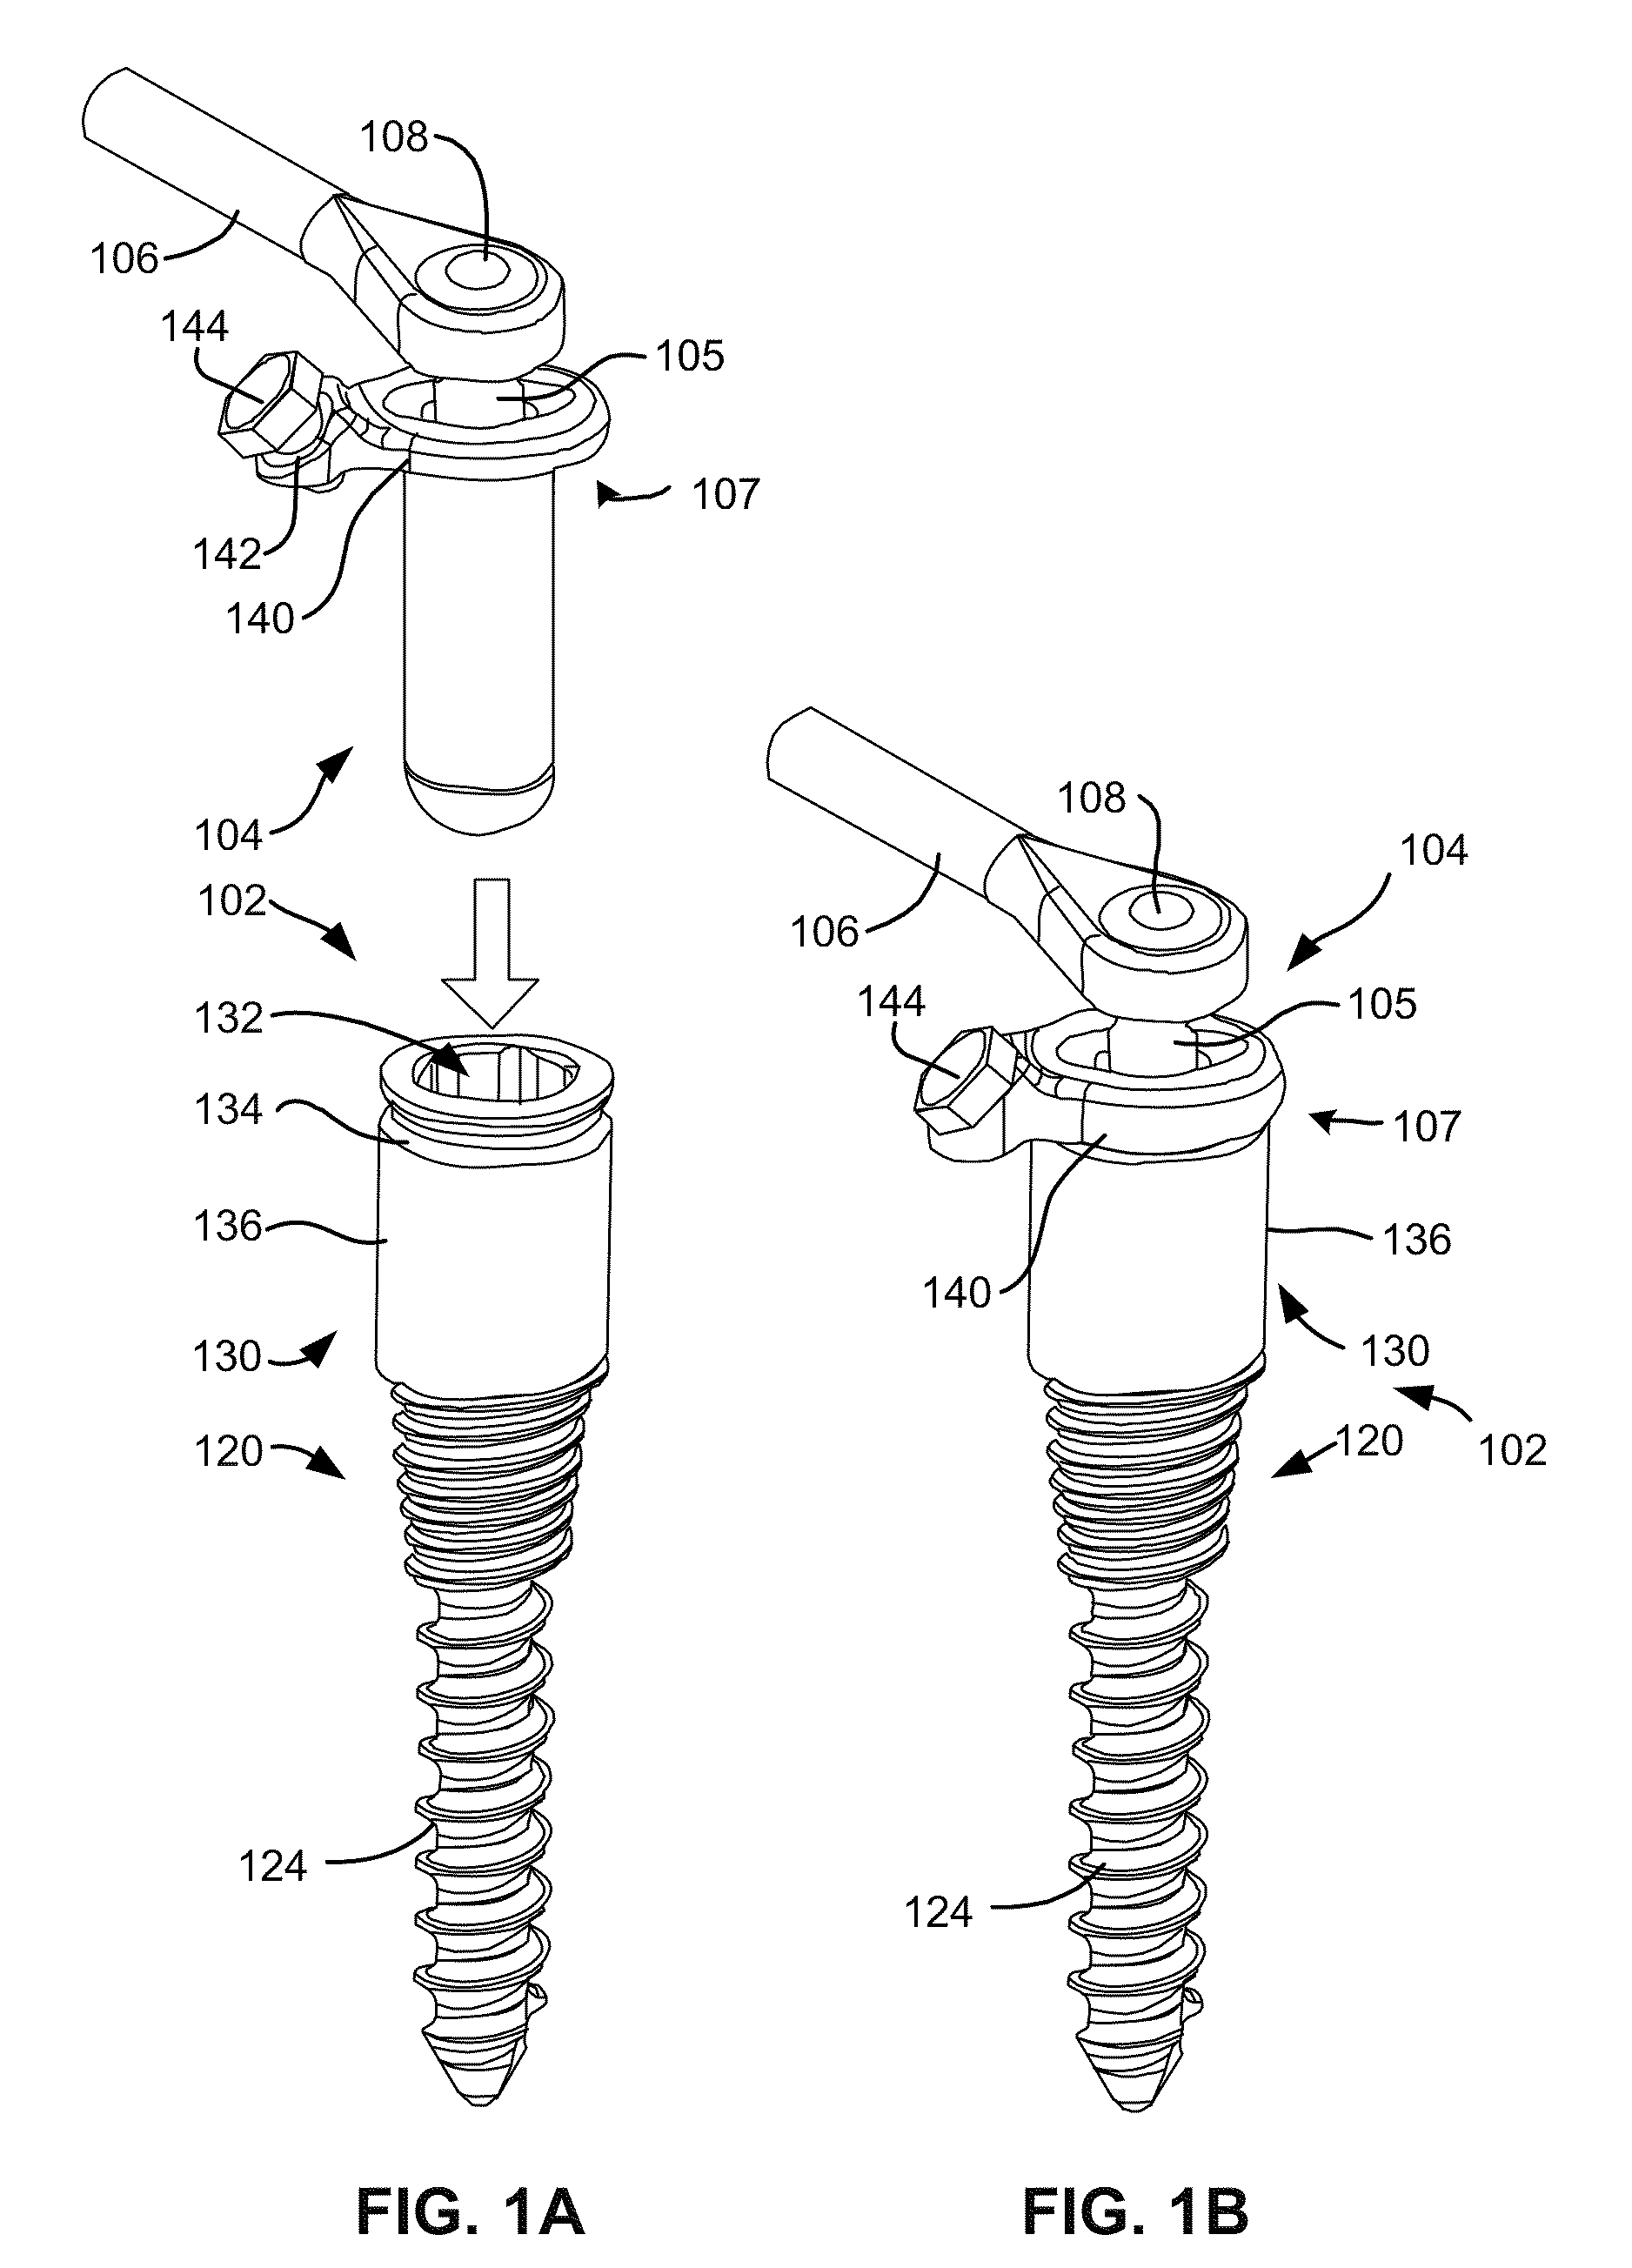 Dynamic spinal rod assembly and method for dynamic stabilization of the spine